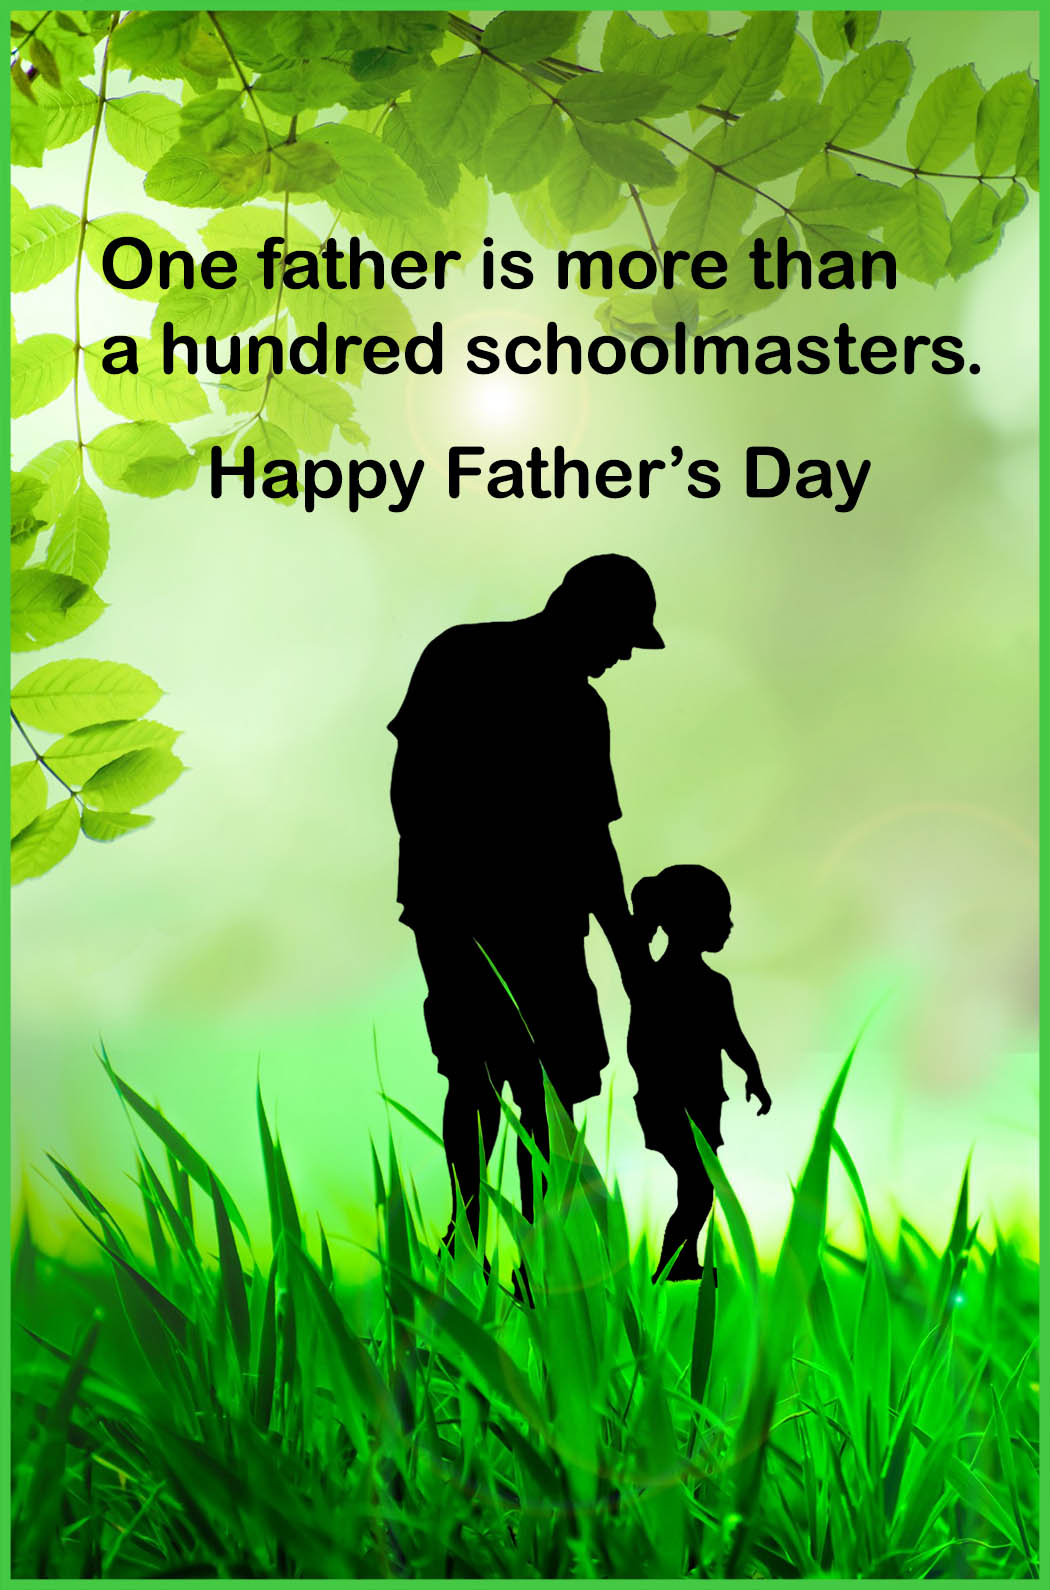 Fathers Day Free Printable Cards